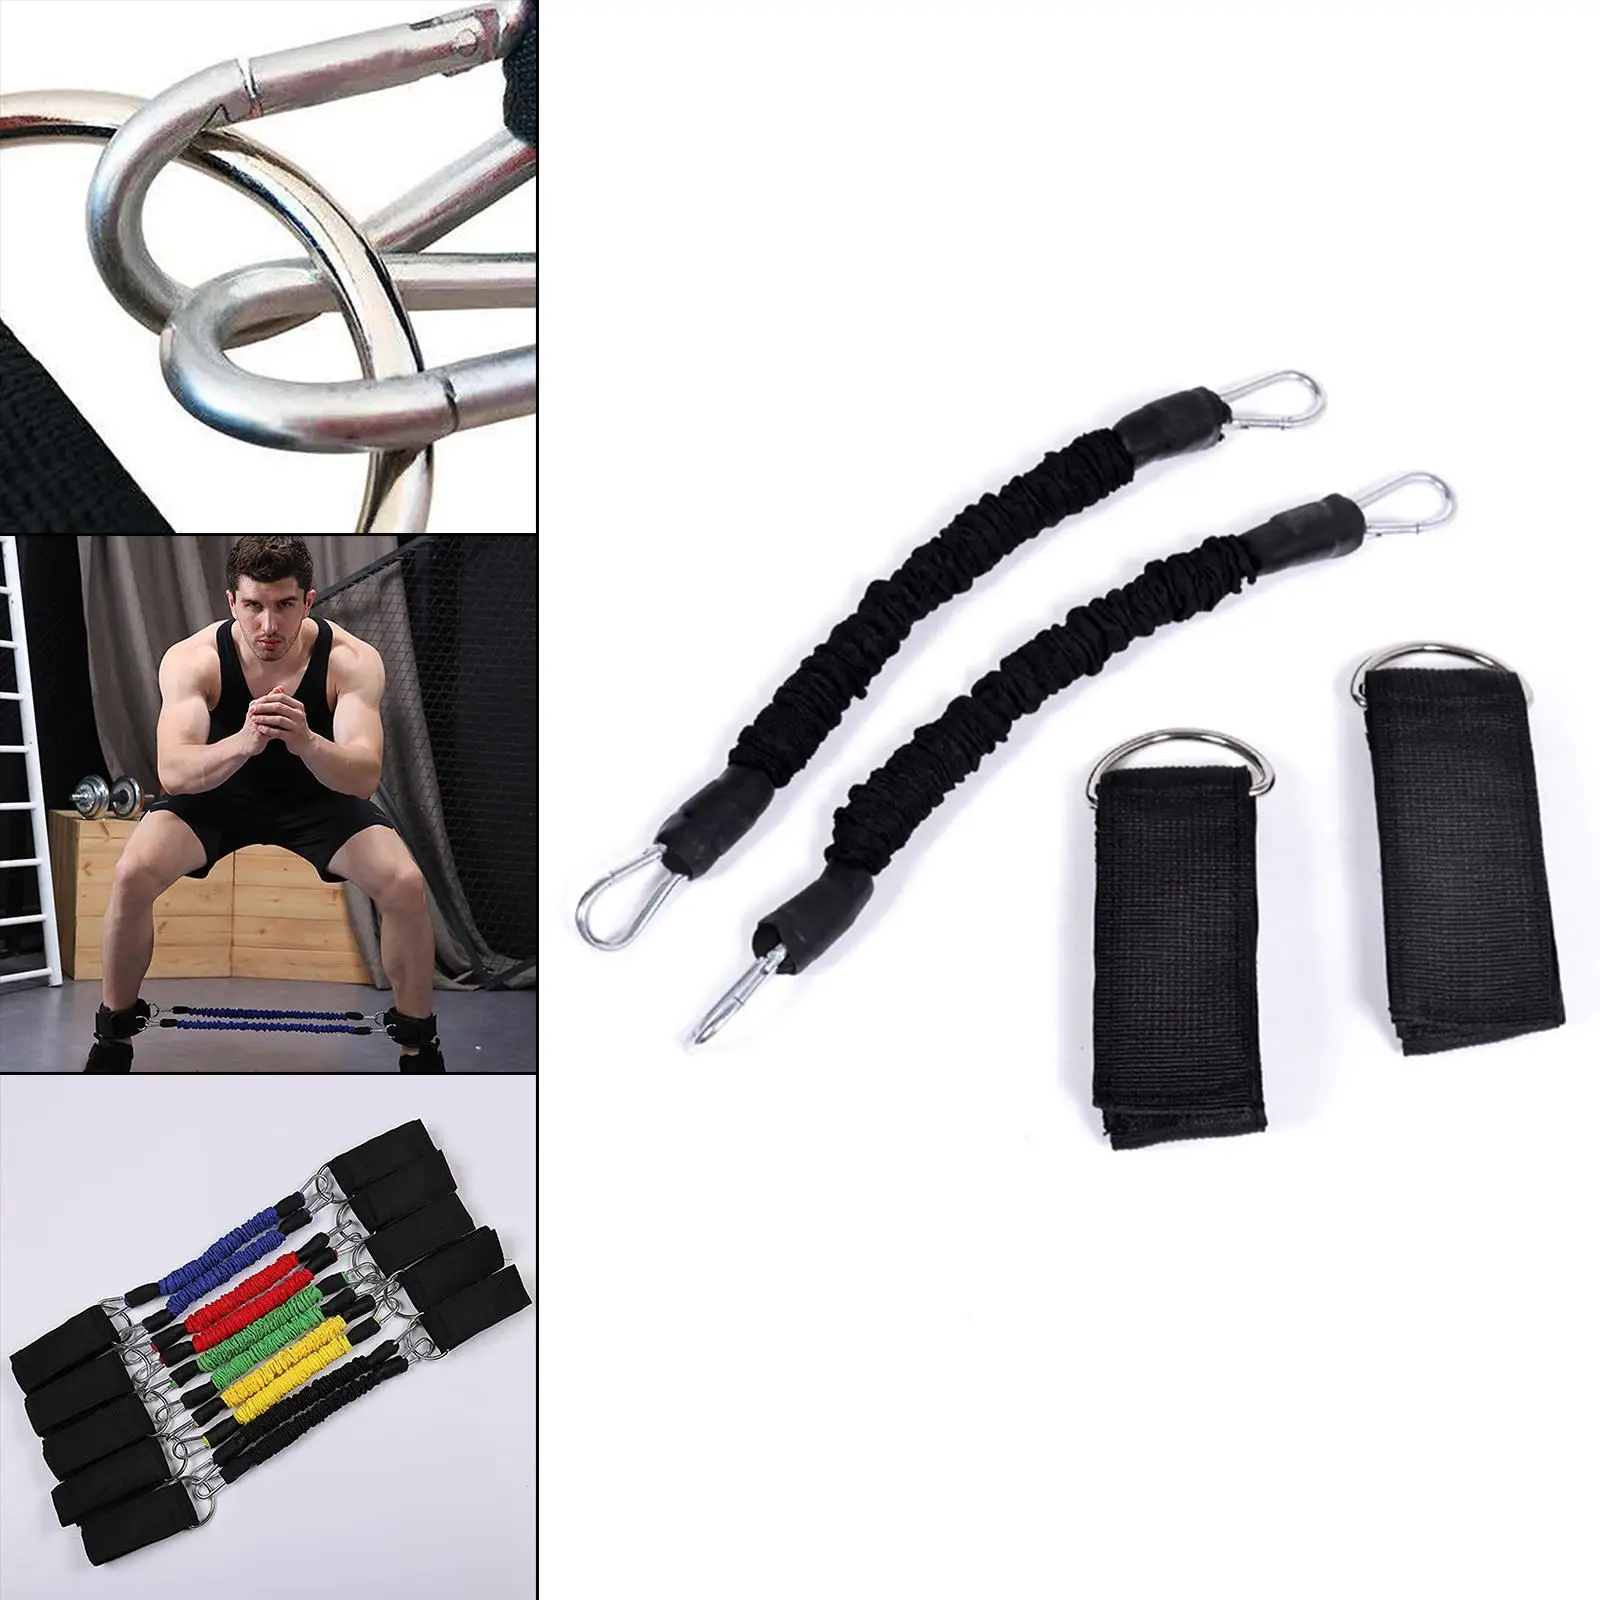 Thigh Bands Yoga Training for Speed Training with Ankle Straps Speed and Strength Bands for Legs Ankle Bands for Working Out